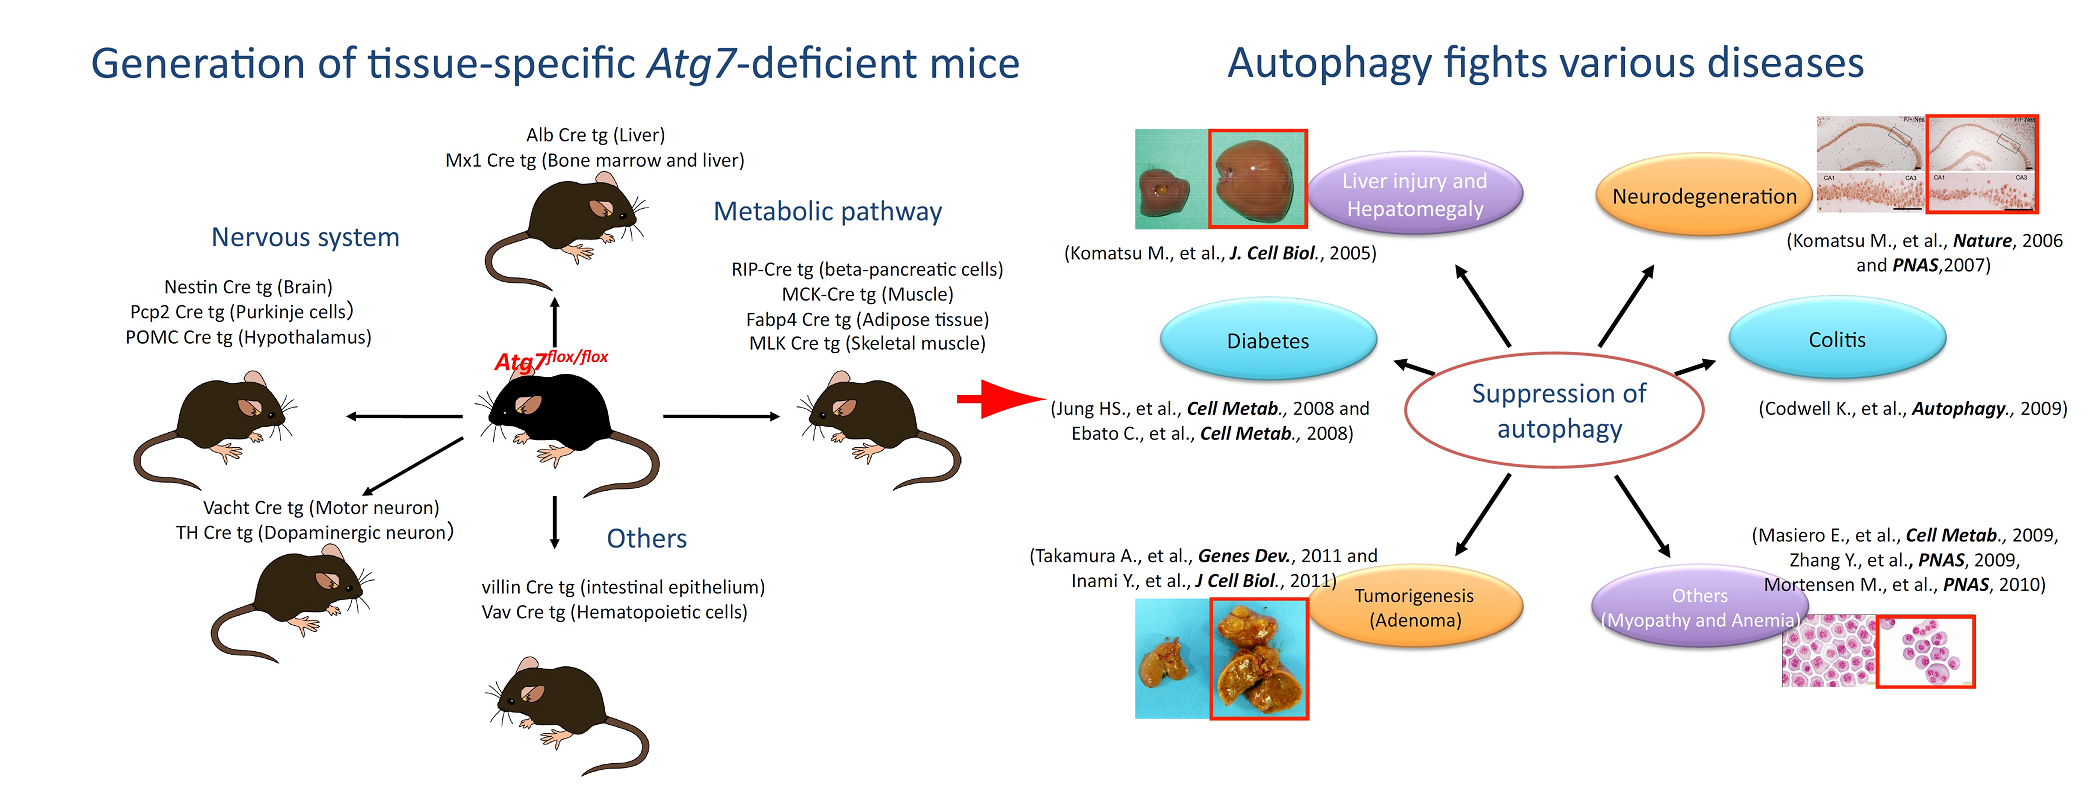 Atg7 deletion in various tissues